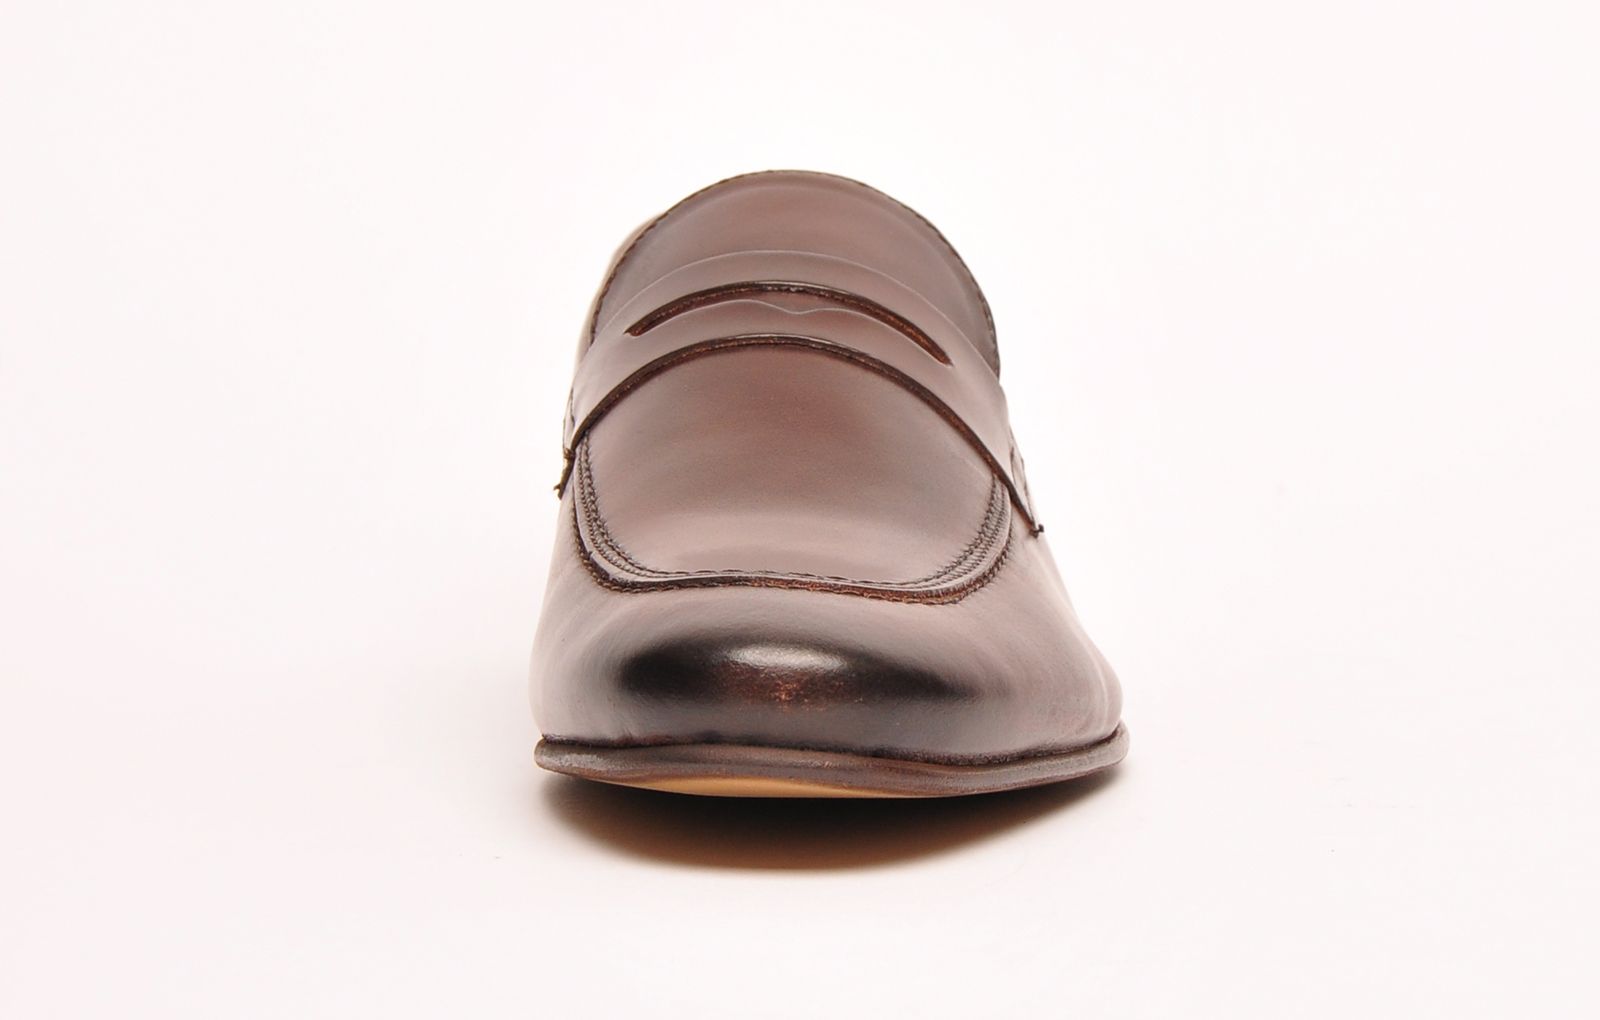 <p>Base London's Tenor exudes class and sophistication and is sure to add a little style to your outfit. Featuring a true loafer design in a premium brown leather upper, full of depth and character, this easy to wear slip-on loafer by Base London offers fantastic underfoot comfort and luxury with a high-quality durable outsole, giving this shoe a super comfy feel with every step you take. Featuring subtle refined neat stitch detail throughout as well as a cushioned patterned insole to give added comfort, these Base London Tenor Loafers embody a great sophisticated versatility that will look equally as refined with any casual or formal outfit - a classic wardrobe staple </p> <p> </p> <p style=